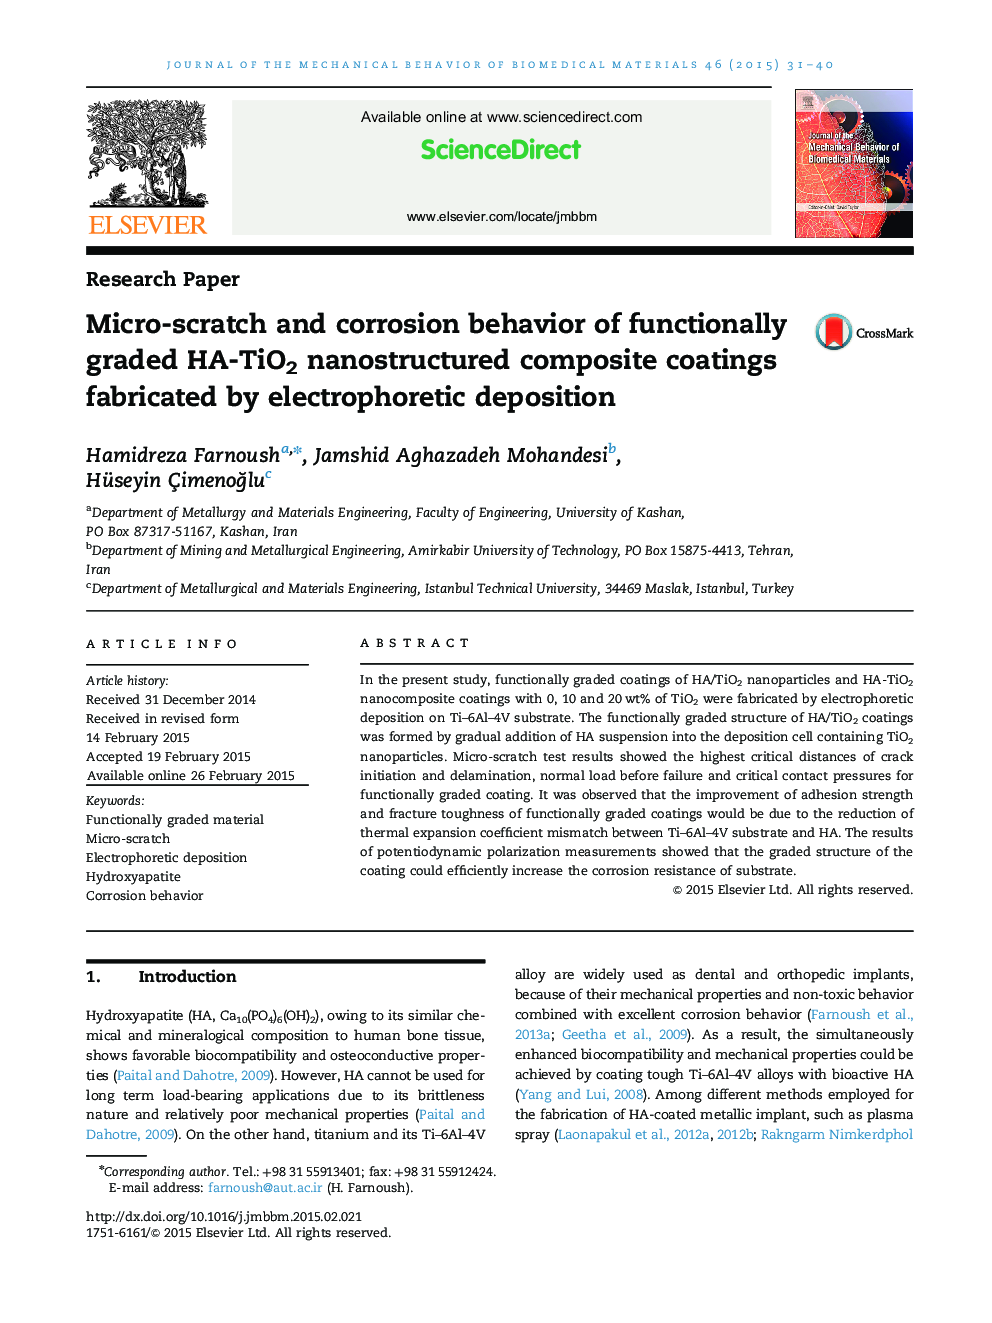 Micro-scratch and corrosion behavior of functionally graded HA-TiO2 nanostructured composite coatings fabricated by electrophoretic deposition